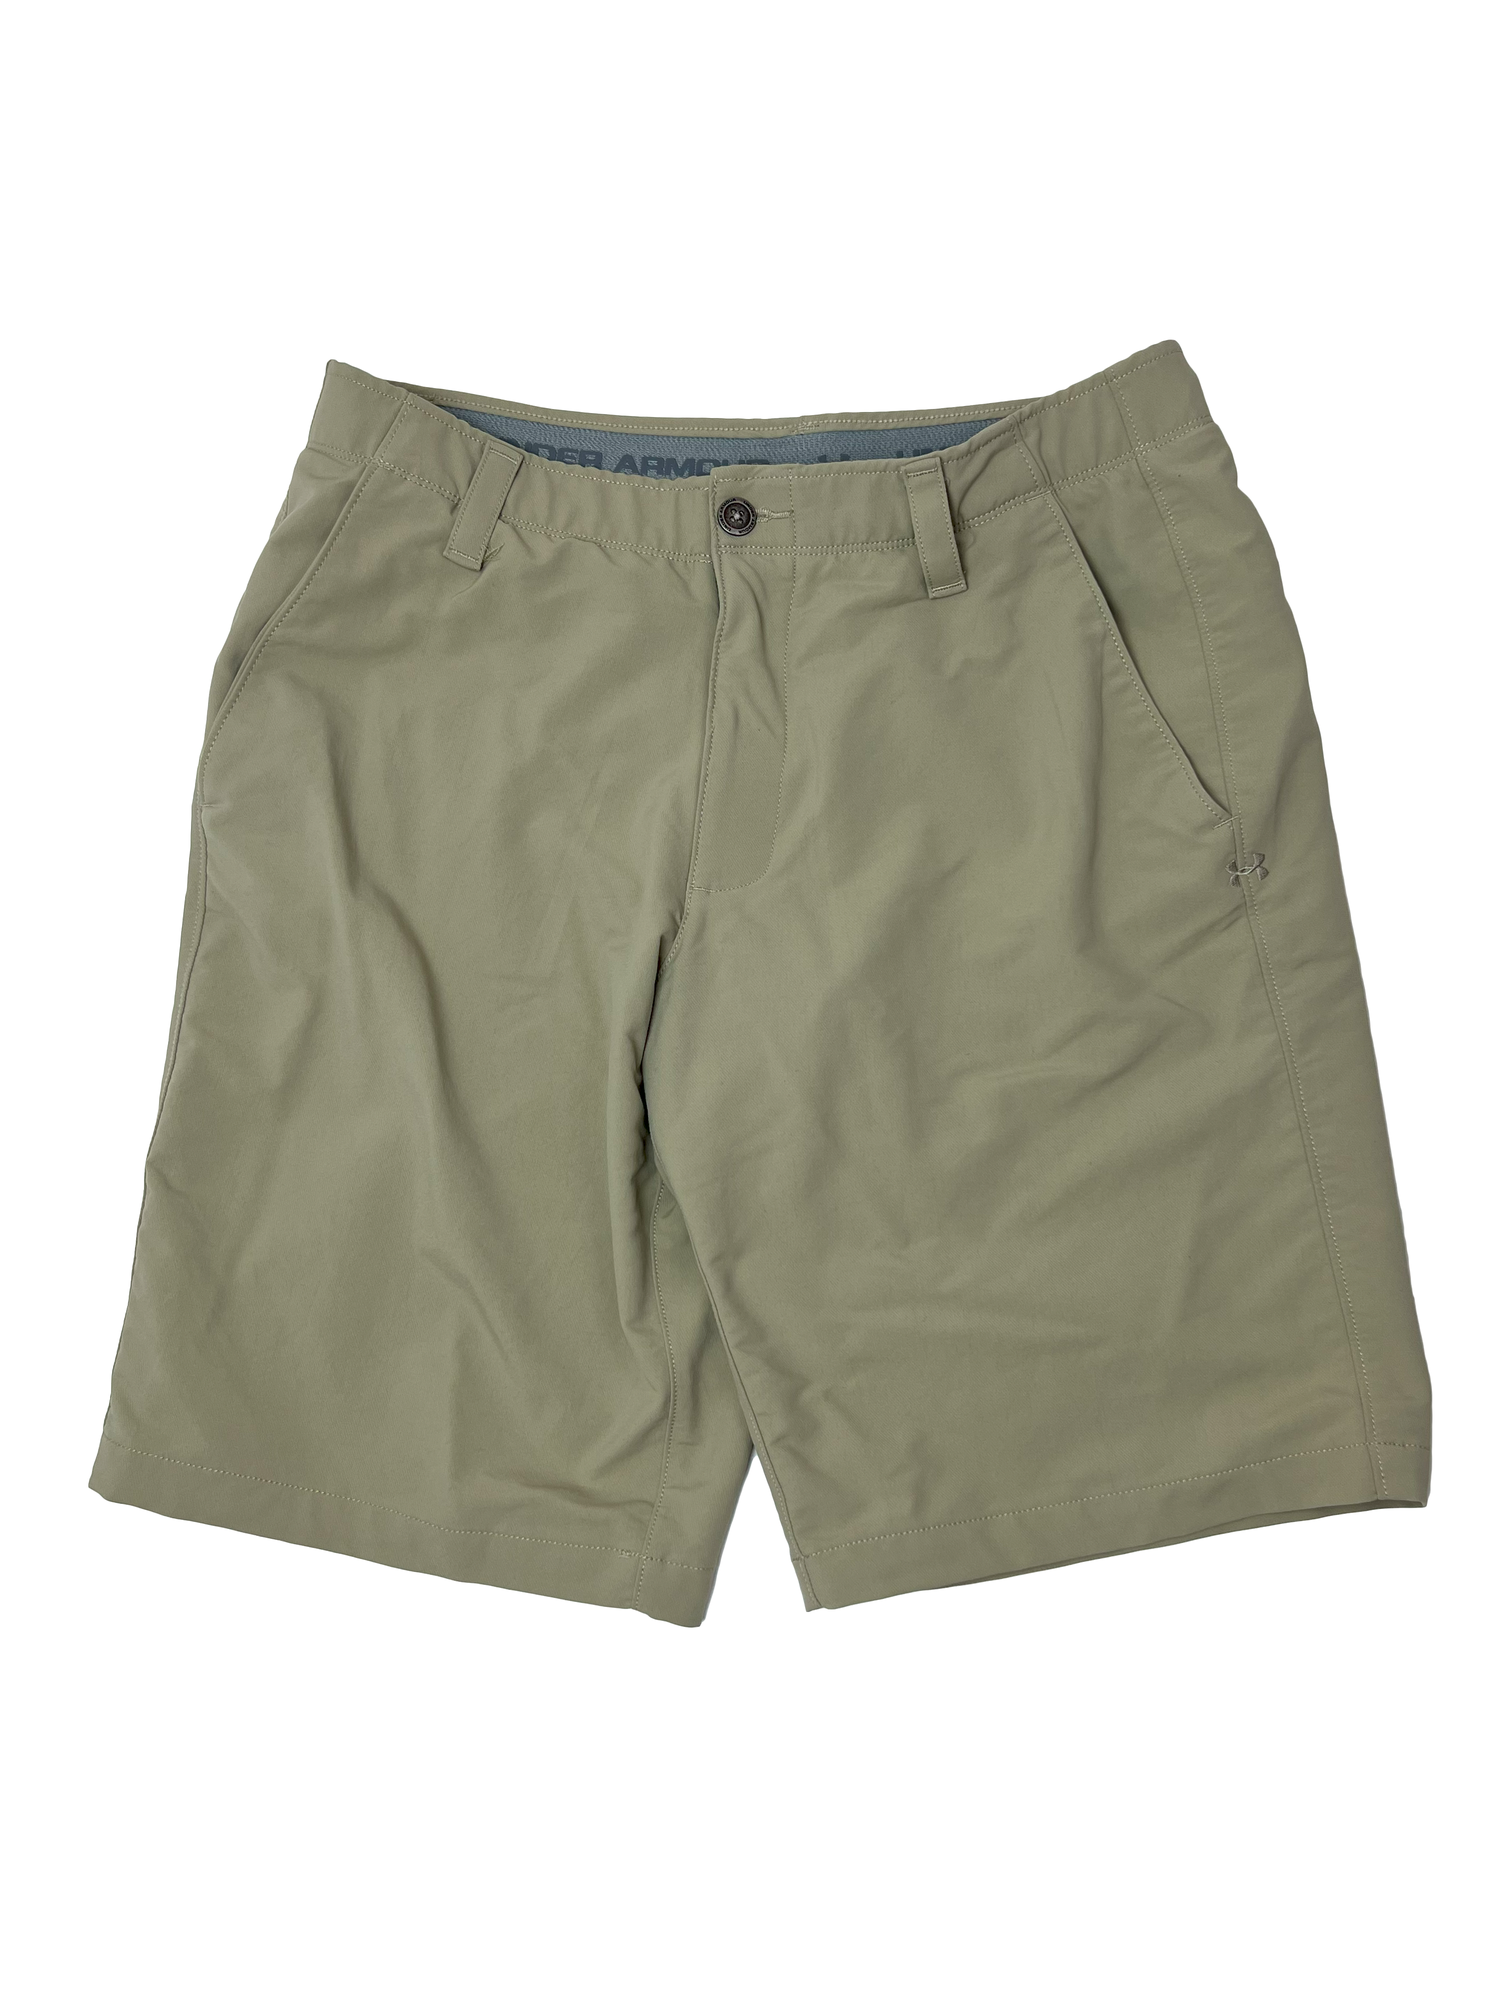 New Under Armour Shorts Size 34 Beige